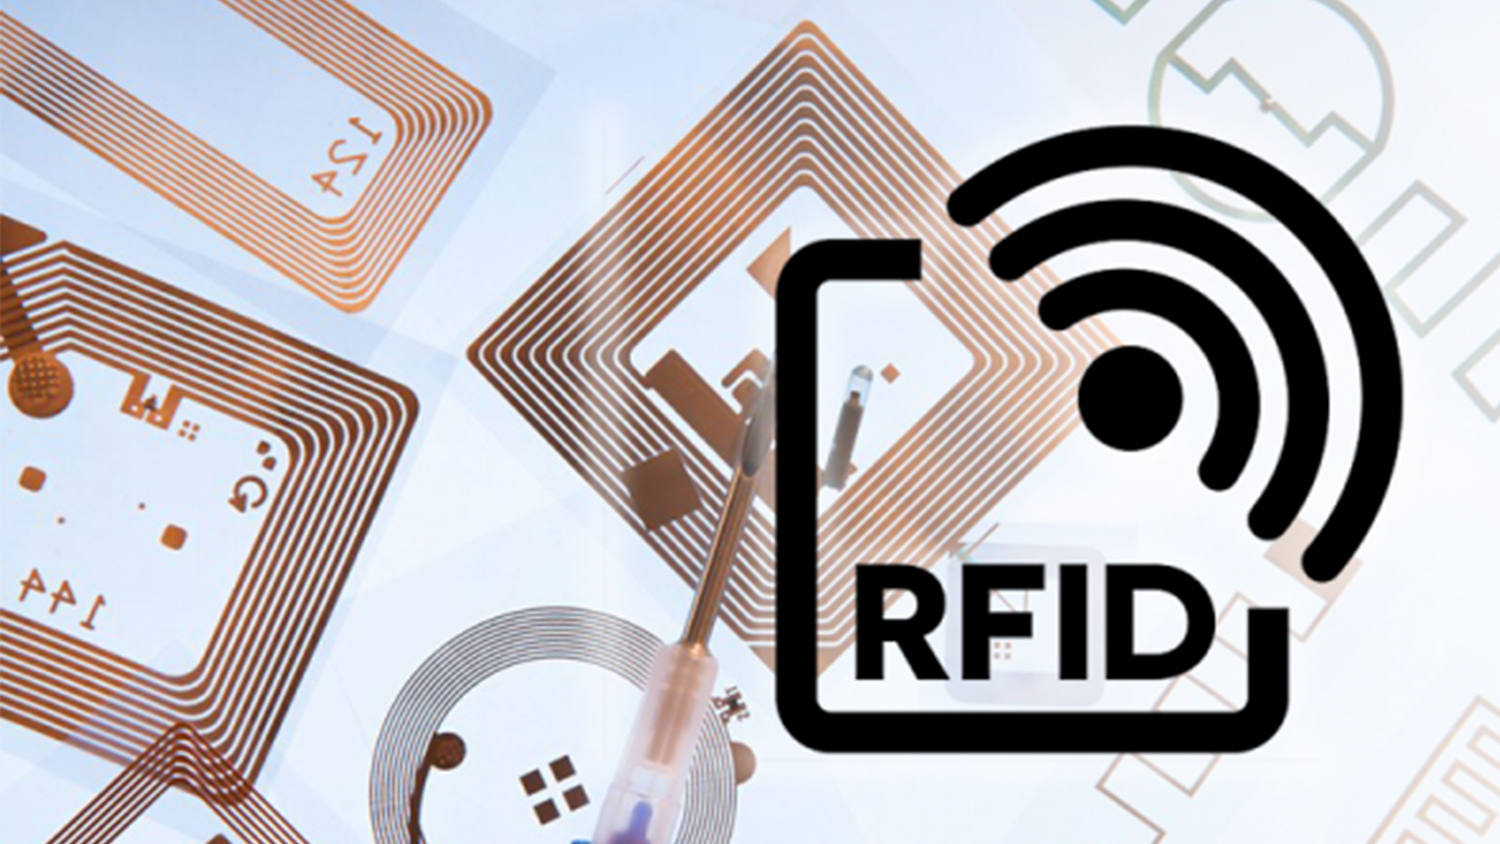 What is RFID and how does it work